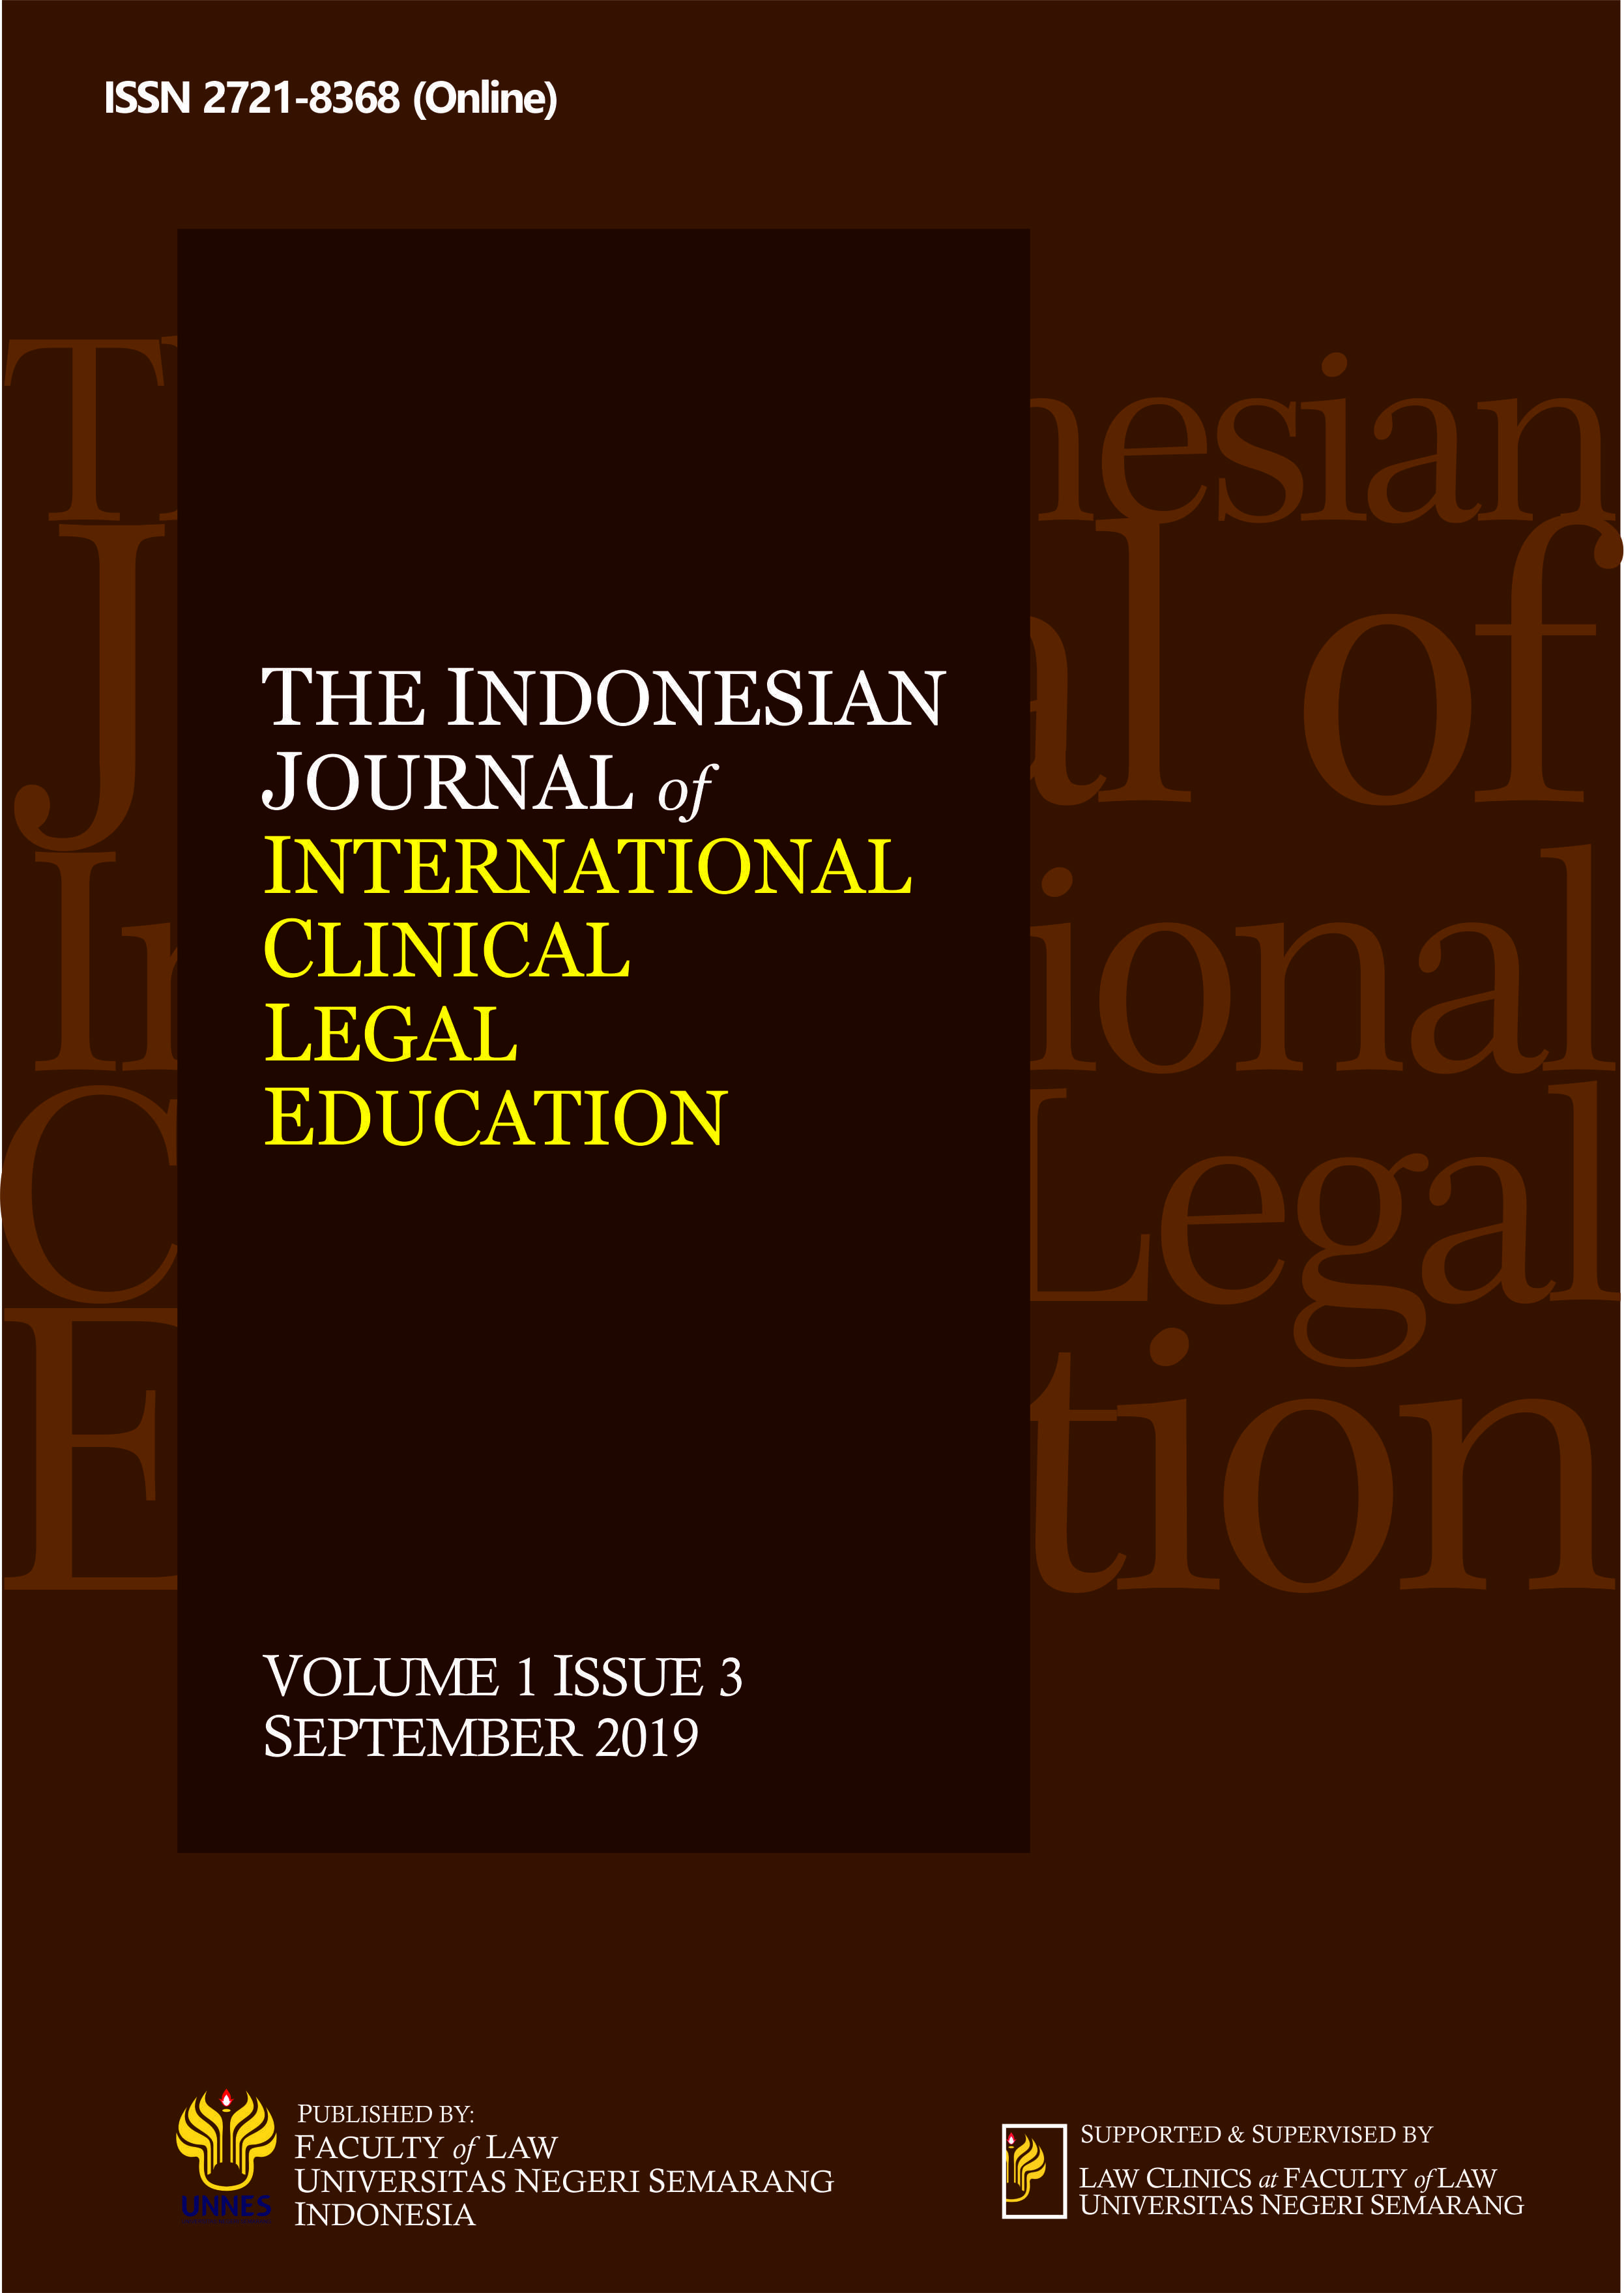 journal of legal education